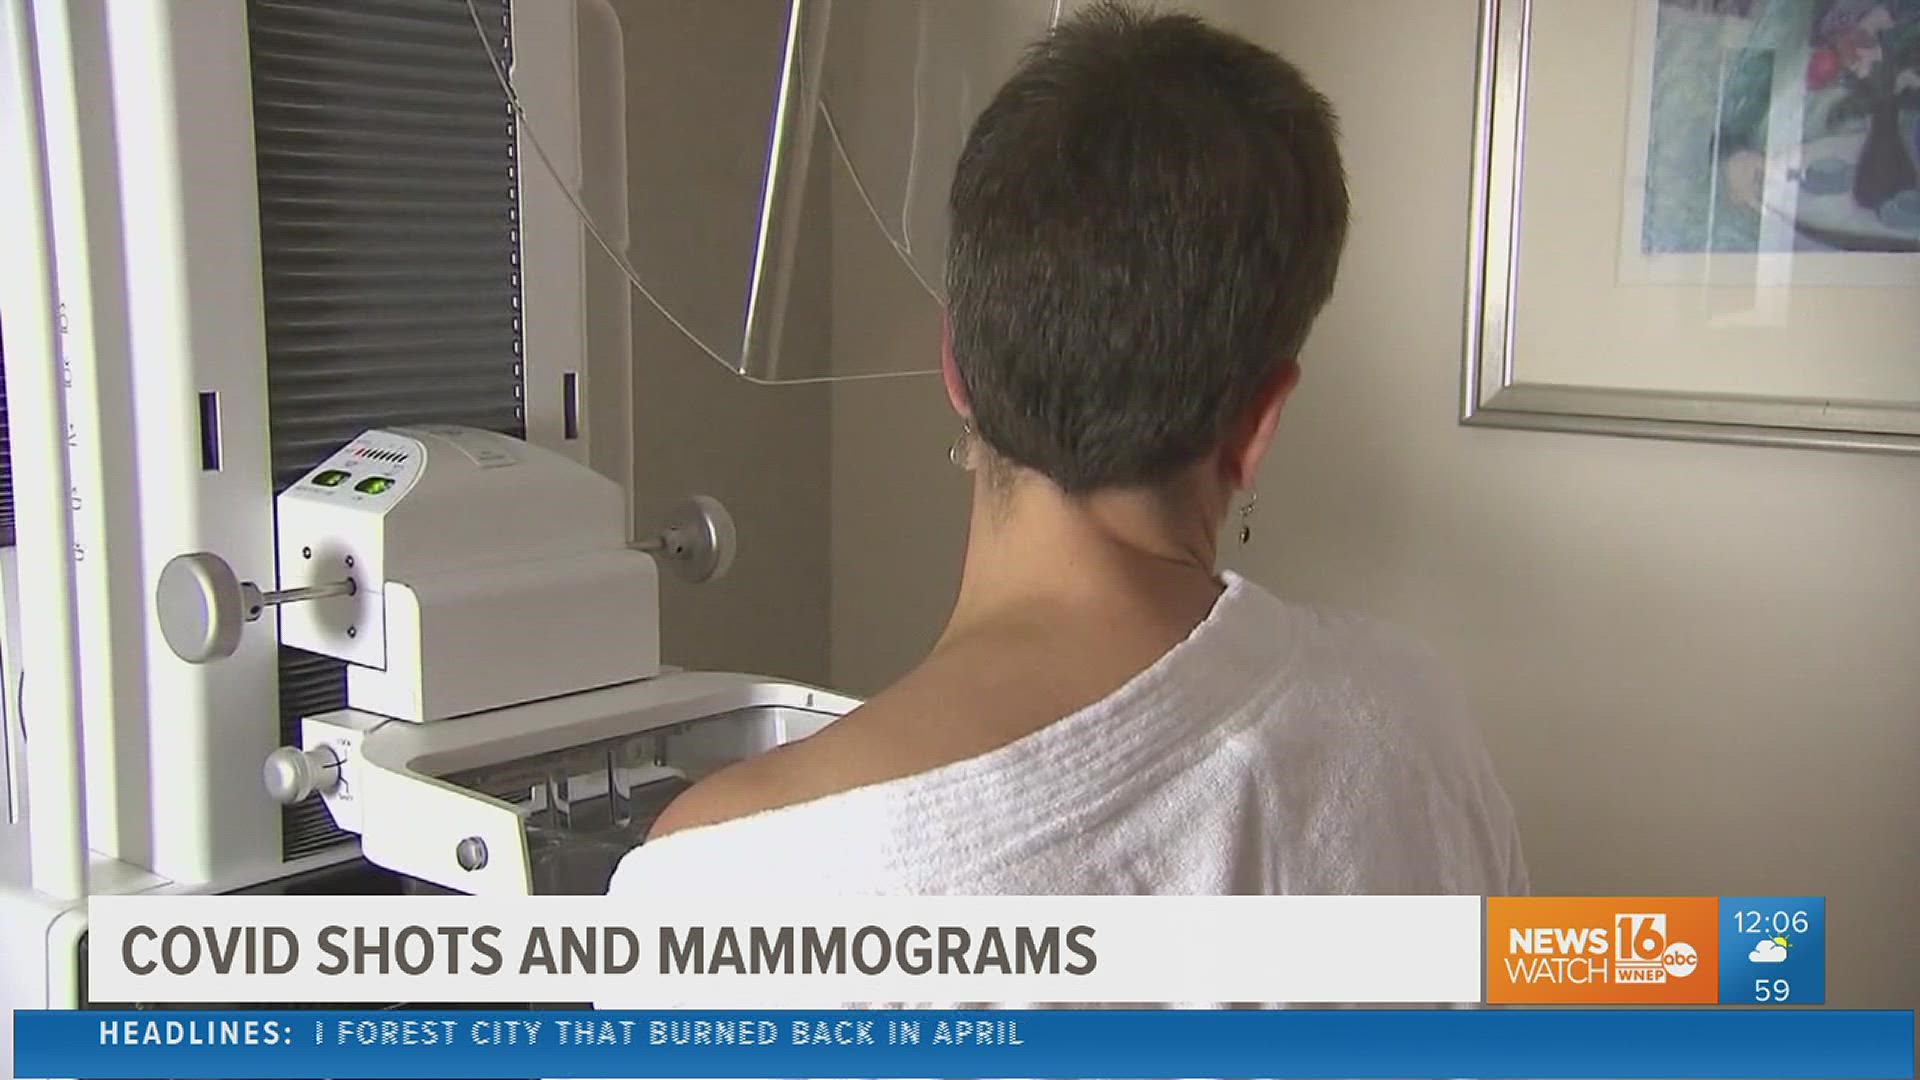 Many women don't realize it when they get their annual mammograms, but the COVID shot can affect what doctors see in those exams. A Scranton doctor explains why.